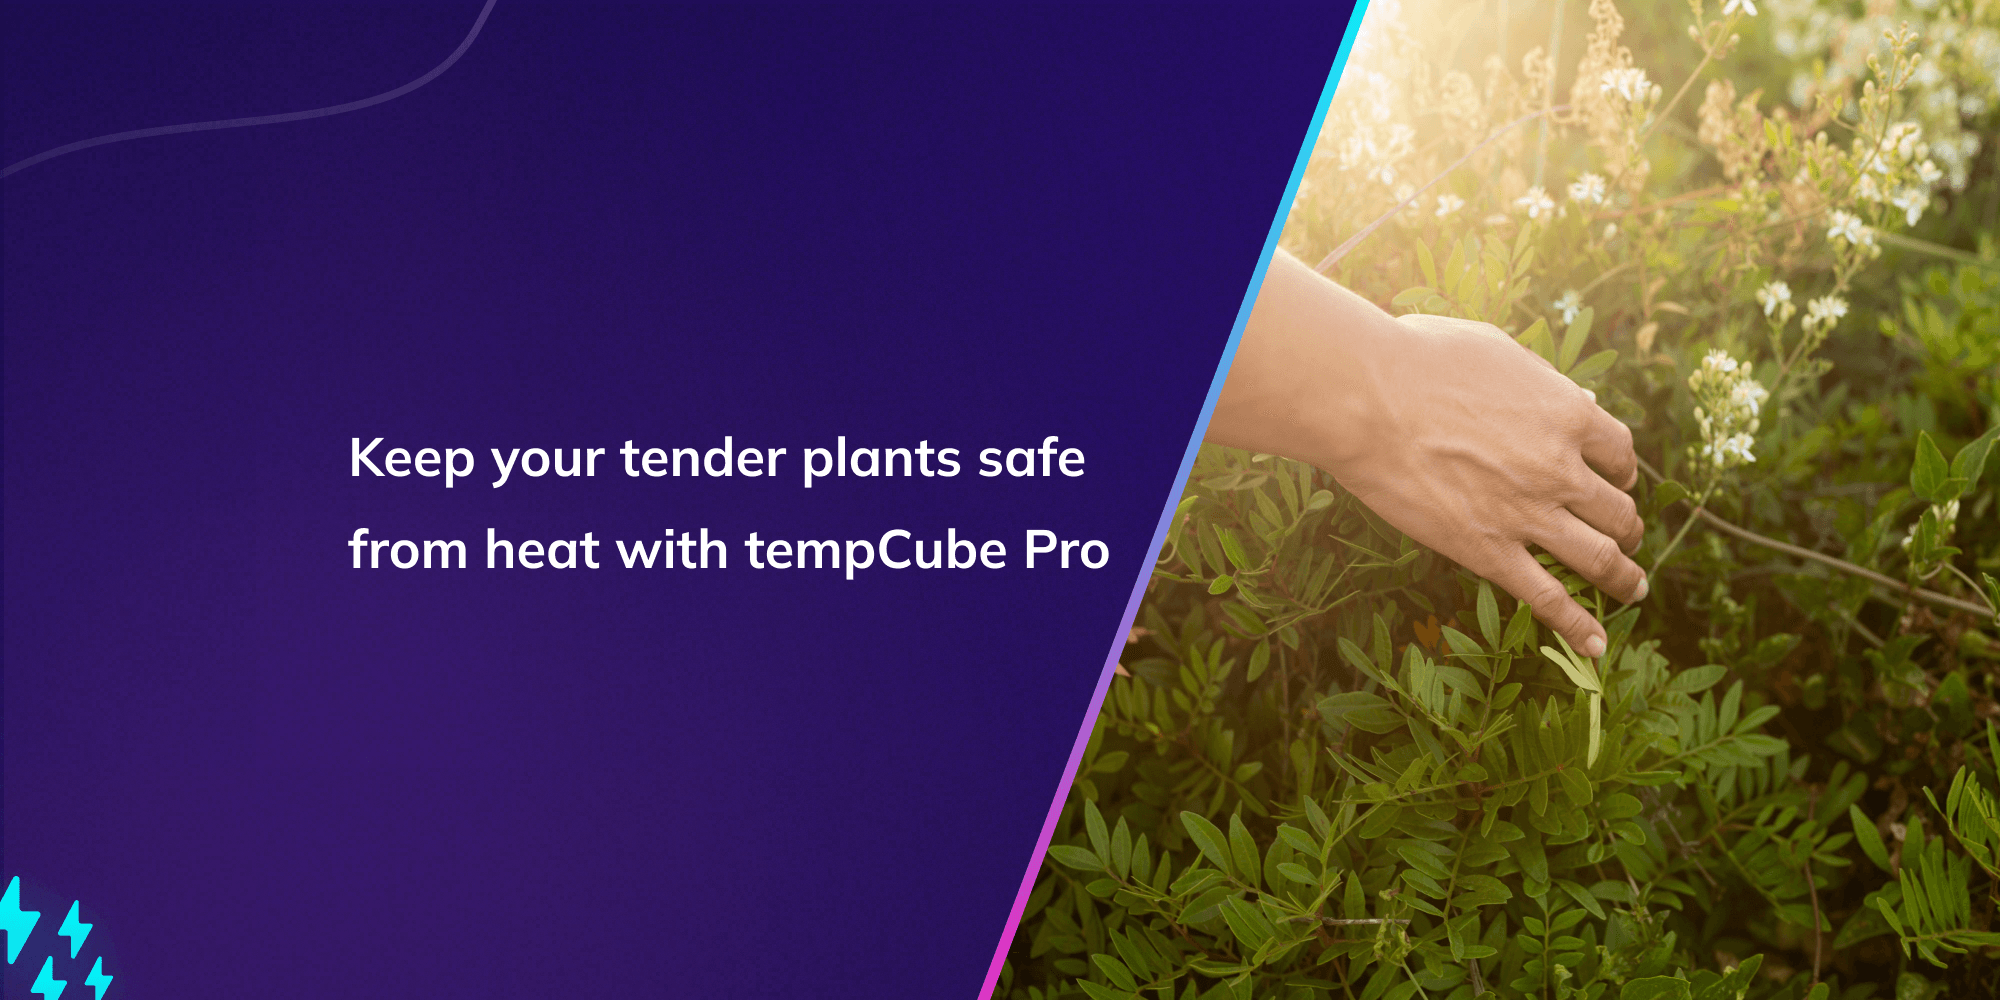 Keep your tender plants safe from heat with tempCube Pro